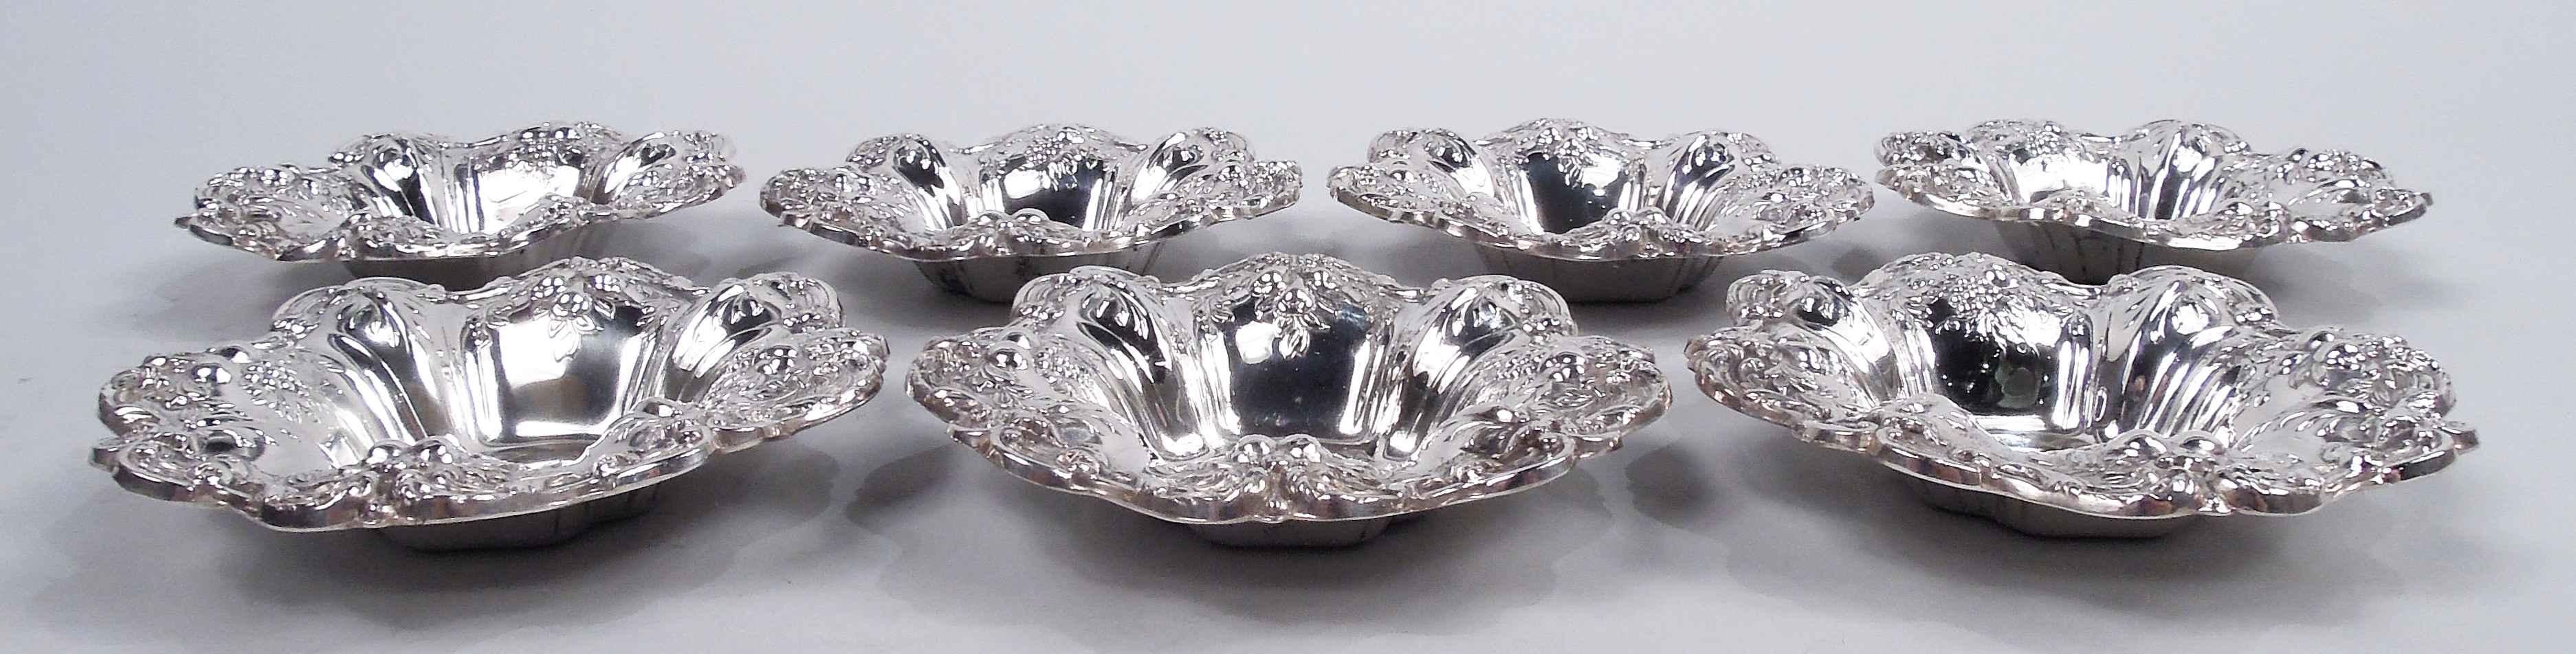 Set of 7 Francis I sterling silver nut dishes. Made by Reed & Barton in Taunton, Mass. 1951-52. Quatrefoil well, lobed sides, and scrolled rim. Embossed fruits and leaves. Nice pieces in the classic pattern. Fully marked including maker’s stamp,